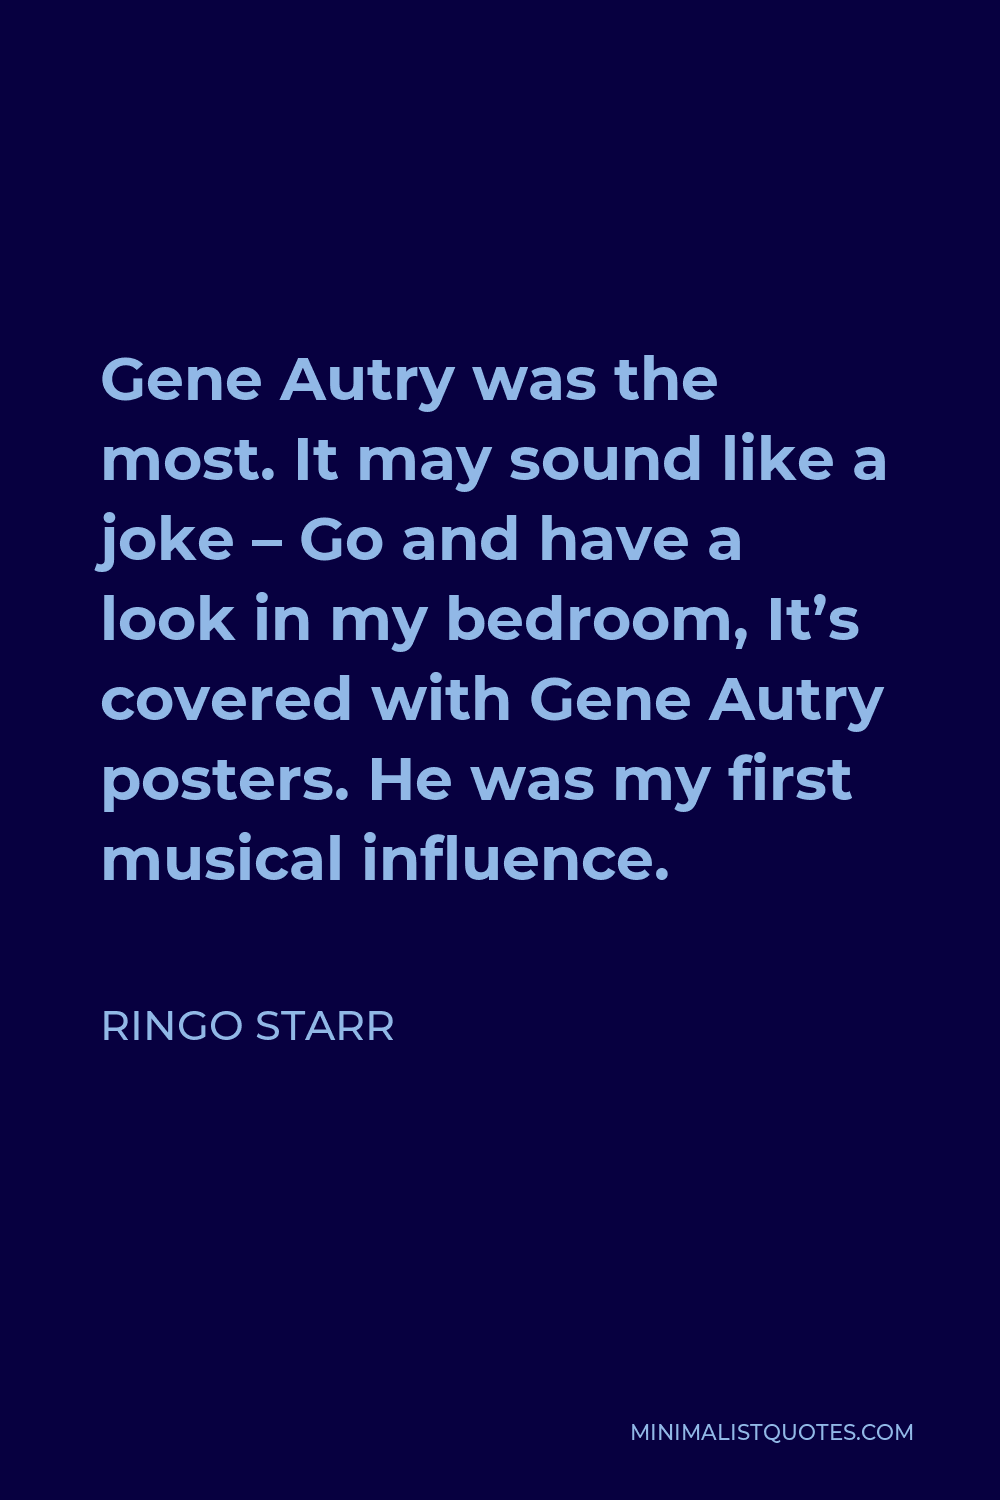 Ringo Starr Quote - Gene Autry was the most. It may sound like a joke – Go and have a look in my bedroom, It’s covered with Gene Autry posters. He was my first musical influence.